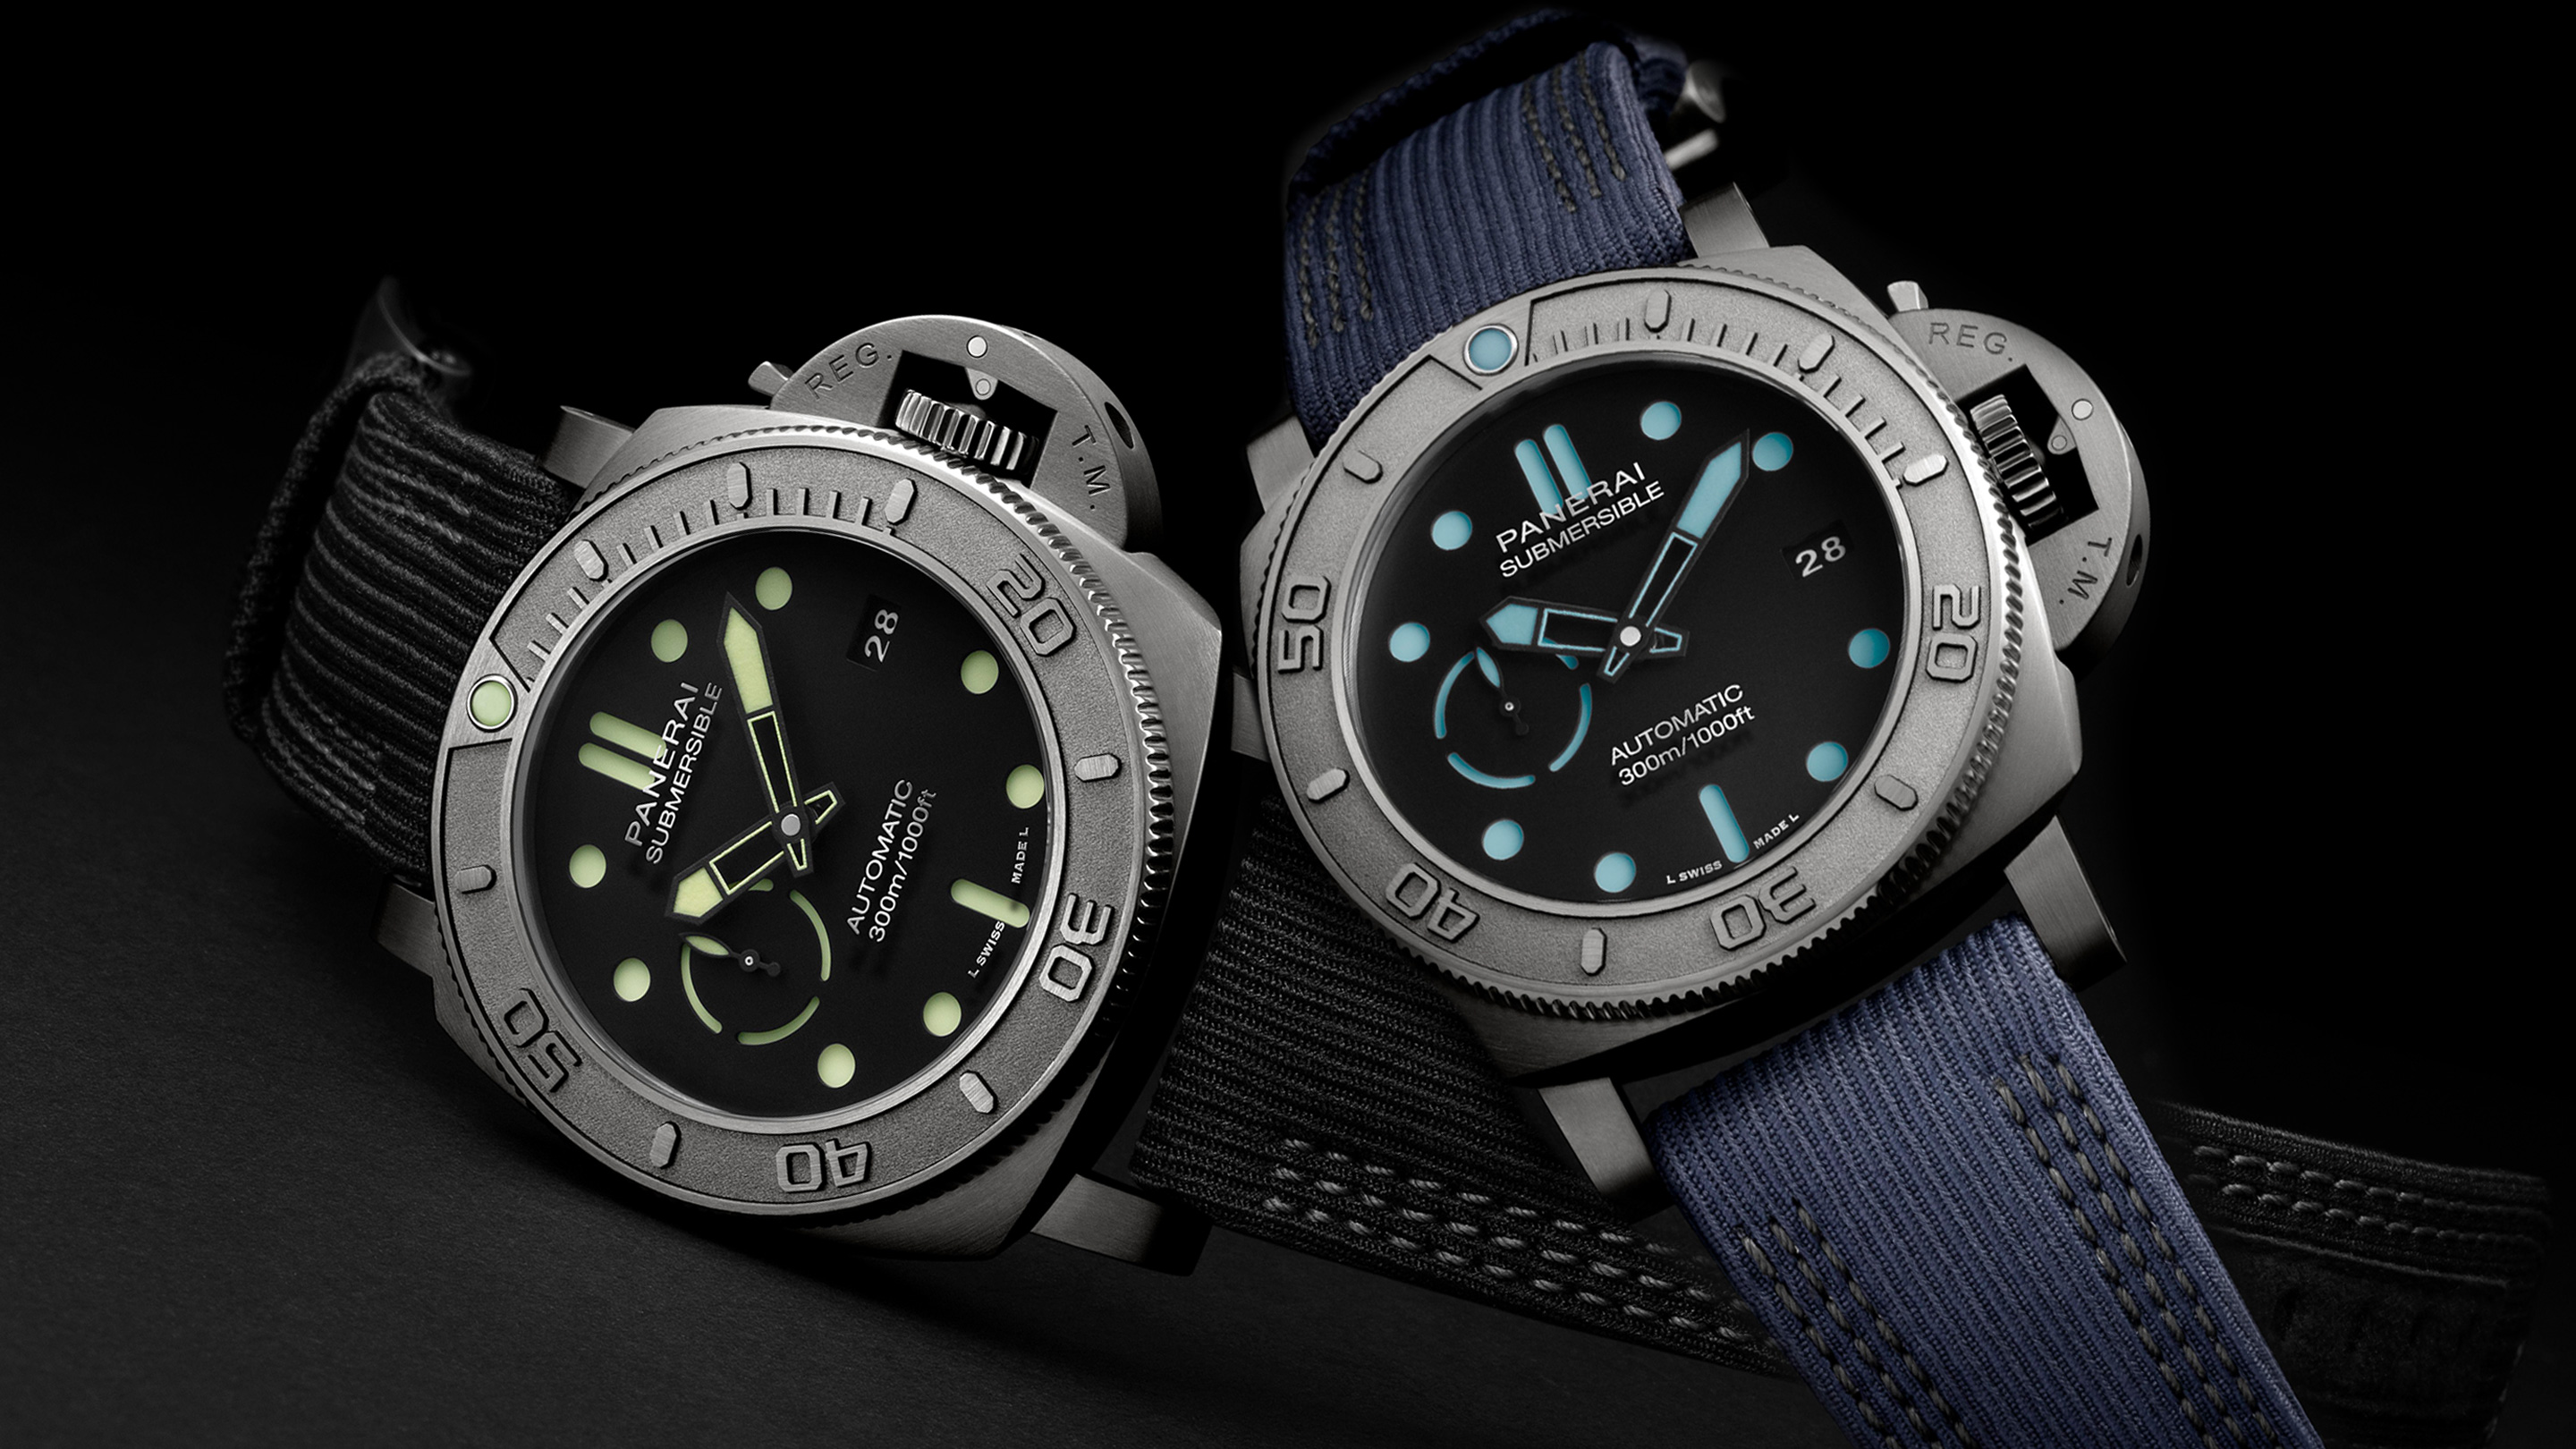 The Panerai Submersible Mike Horn 